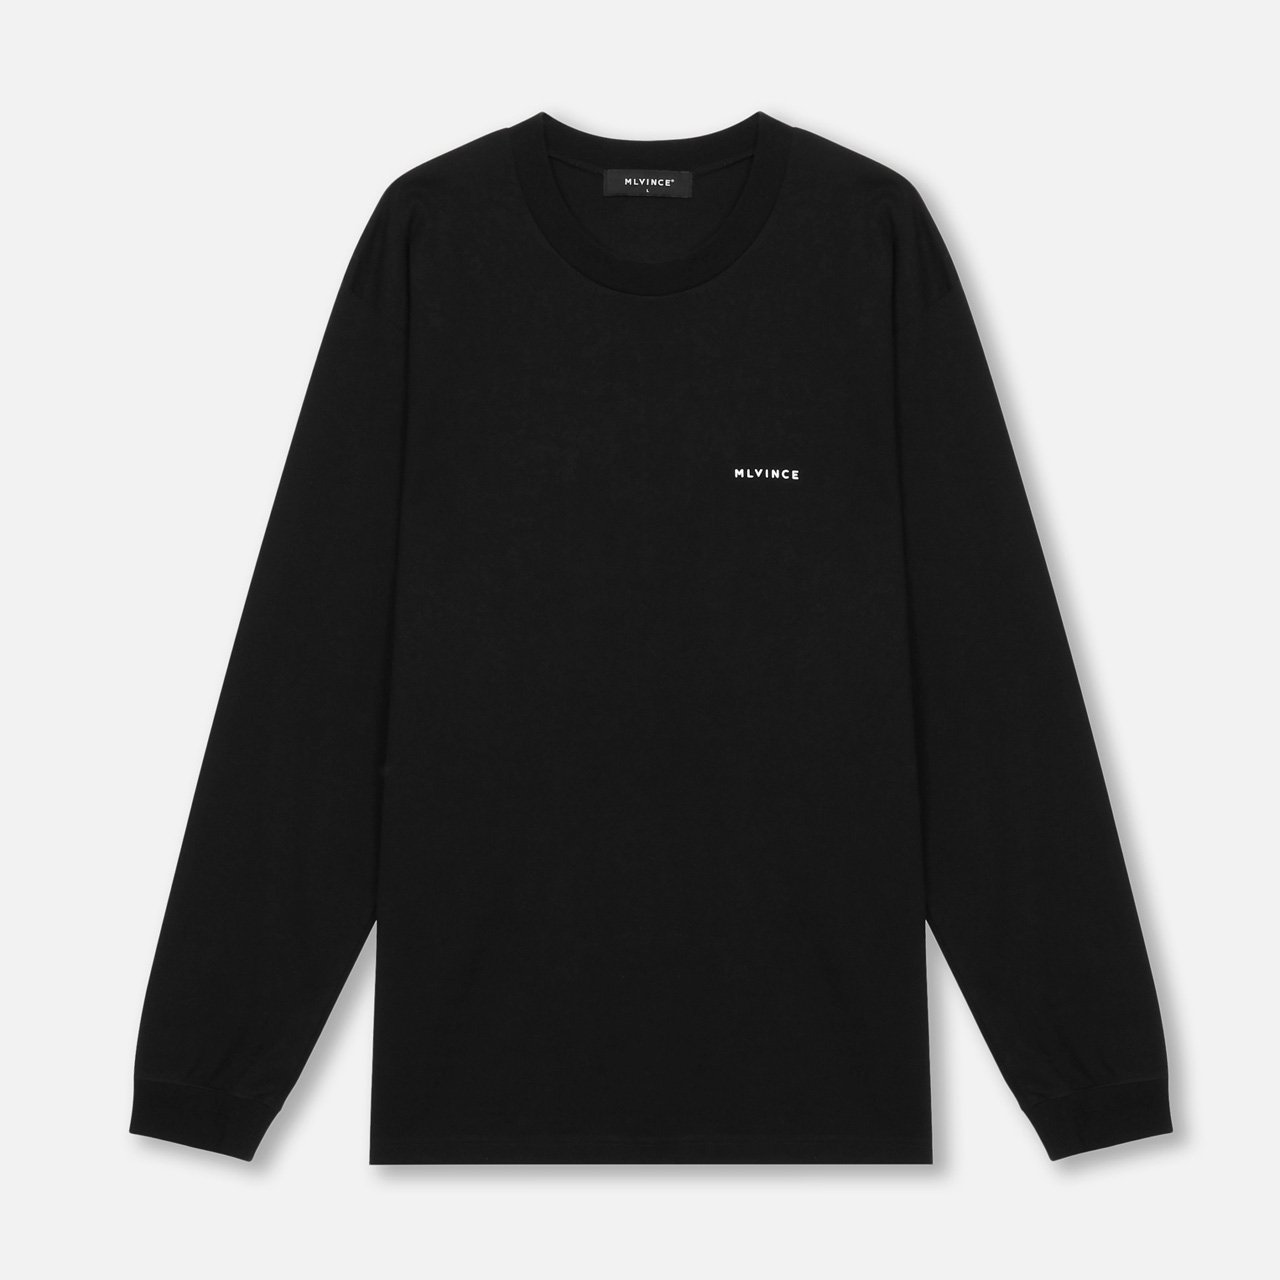 MLVINCE (メルヴィンス) 23FW/秋冬
CLASSIC LOGO L/S TEE